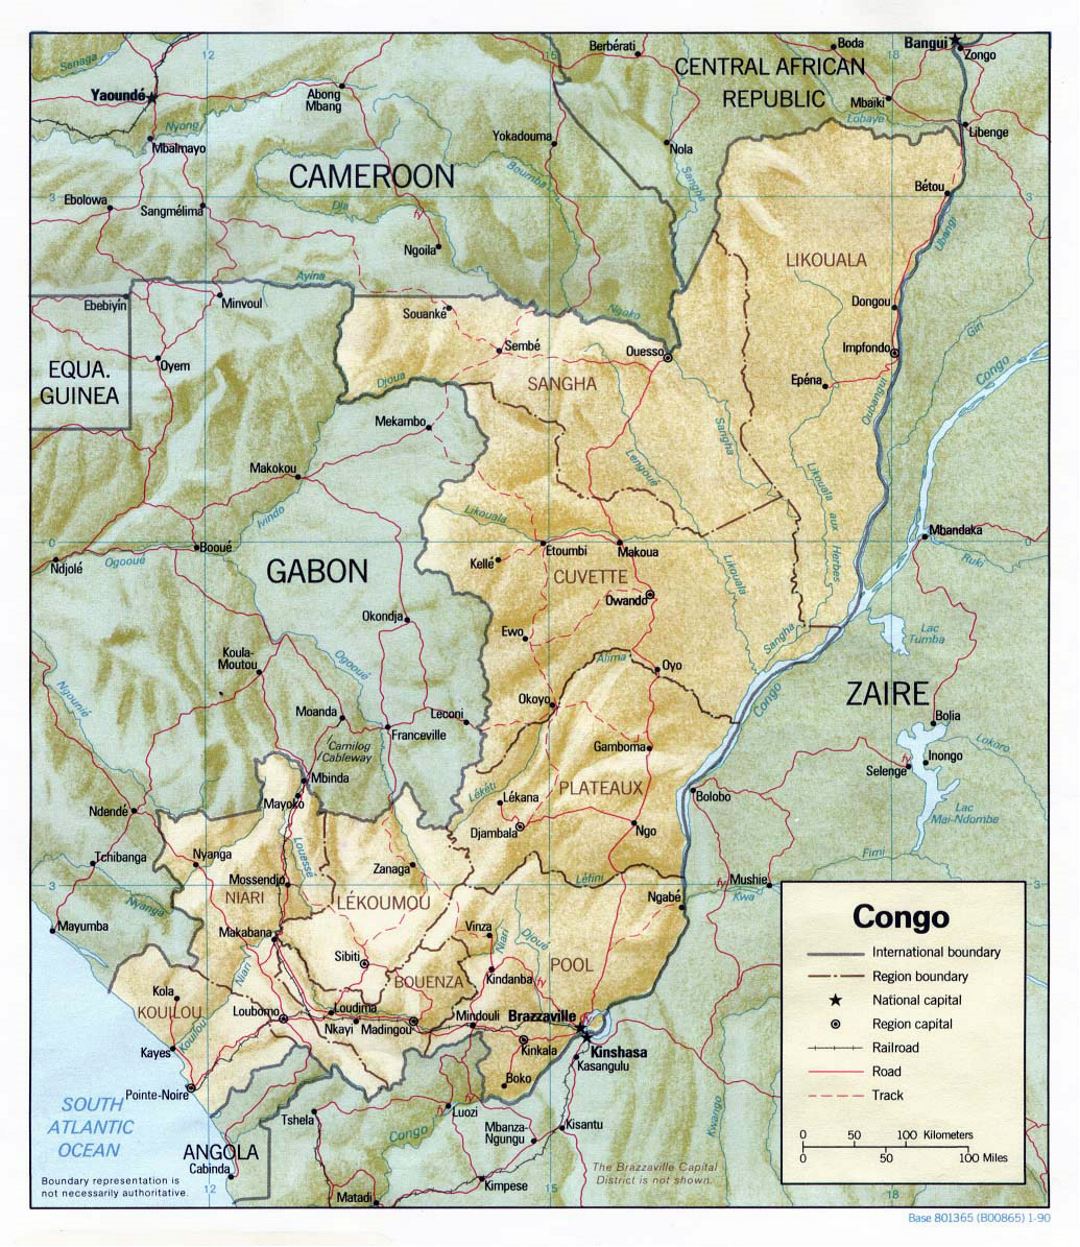 Detailed political and administrative map of Congo with relief, roads, railroads and major cities - 1990